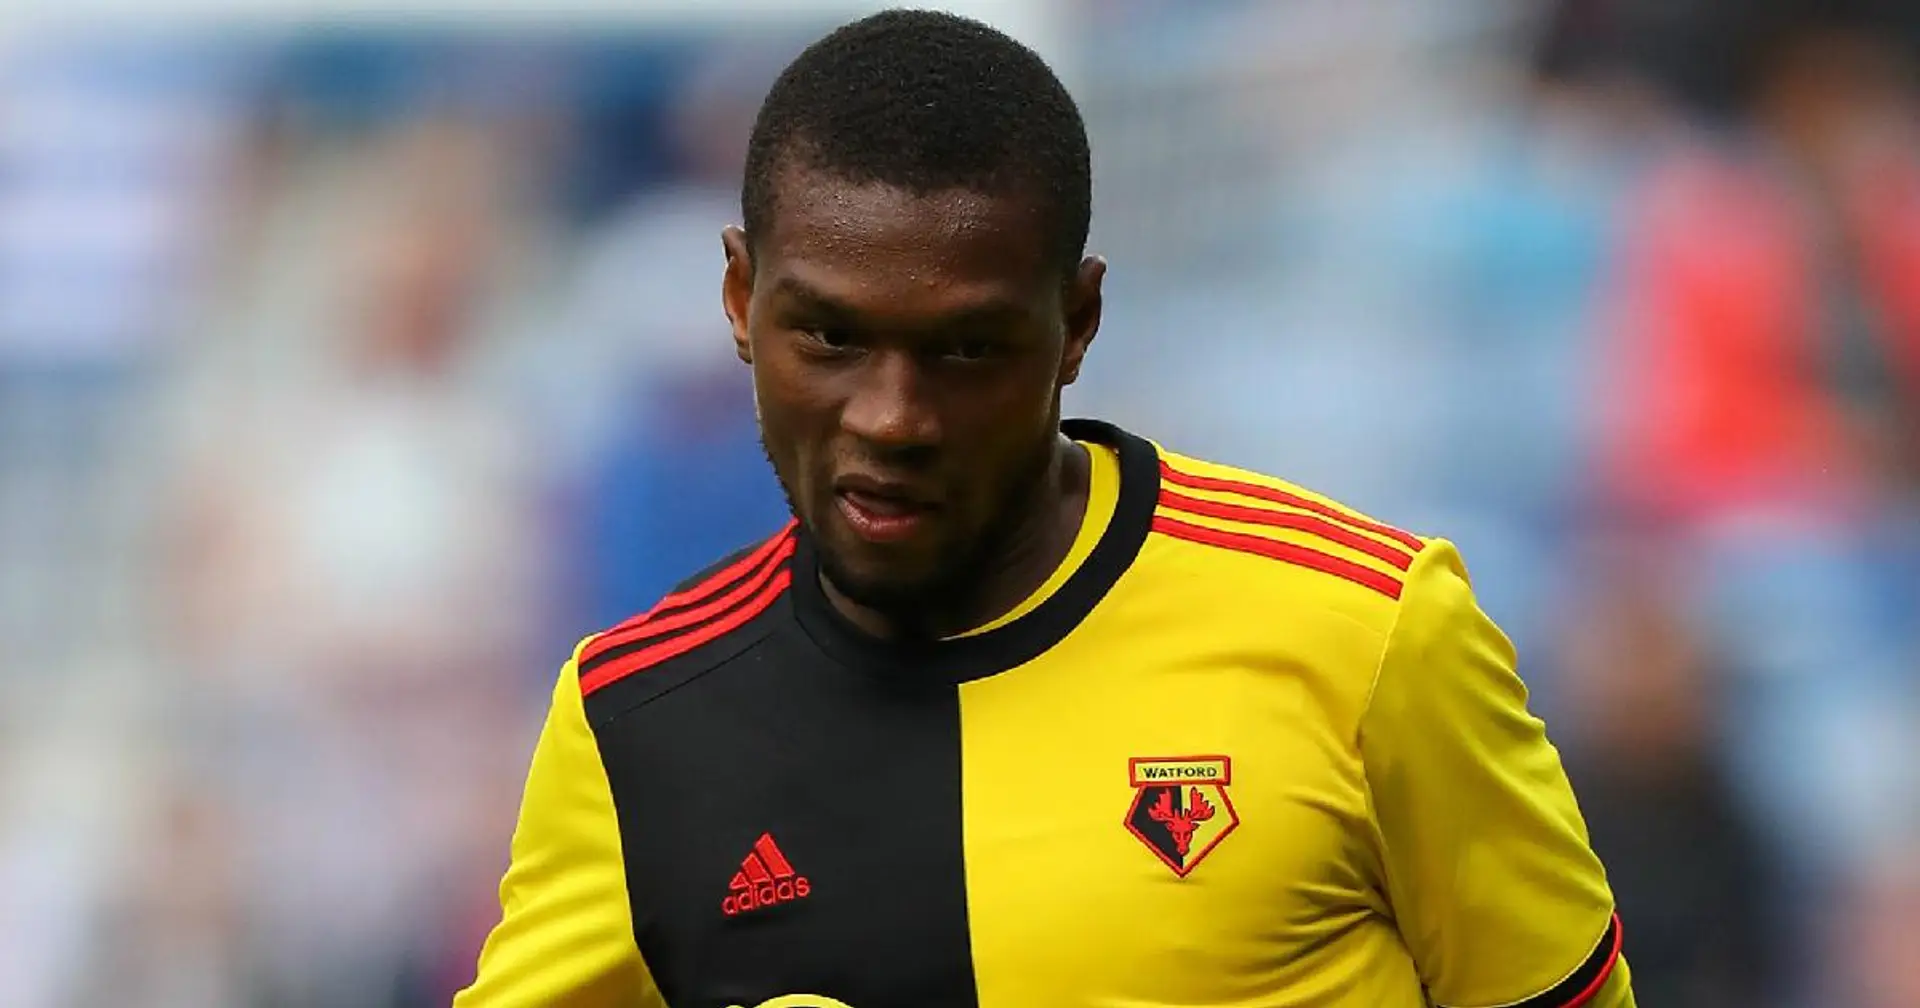 Christian Kabasele slams Twitter user who suggests Watford are using 'tactics' to avoid relegation as 2 more Hornets self-isolate amid coronavirus fears